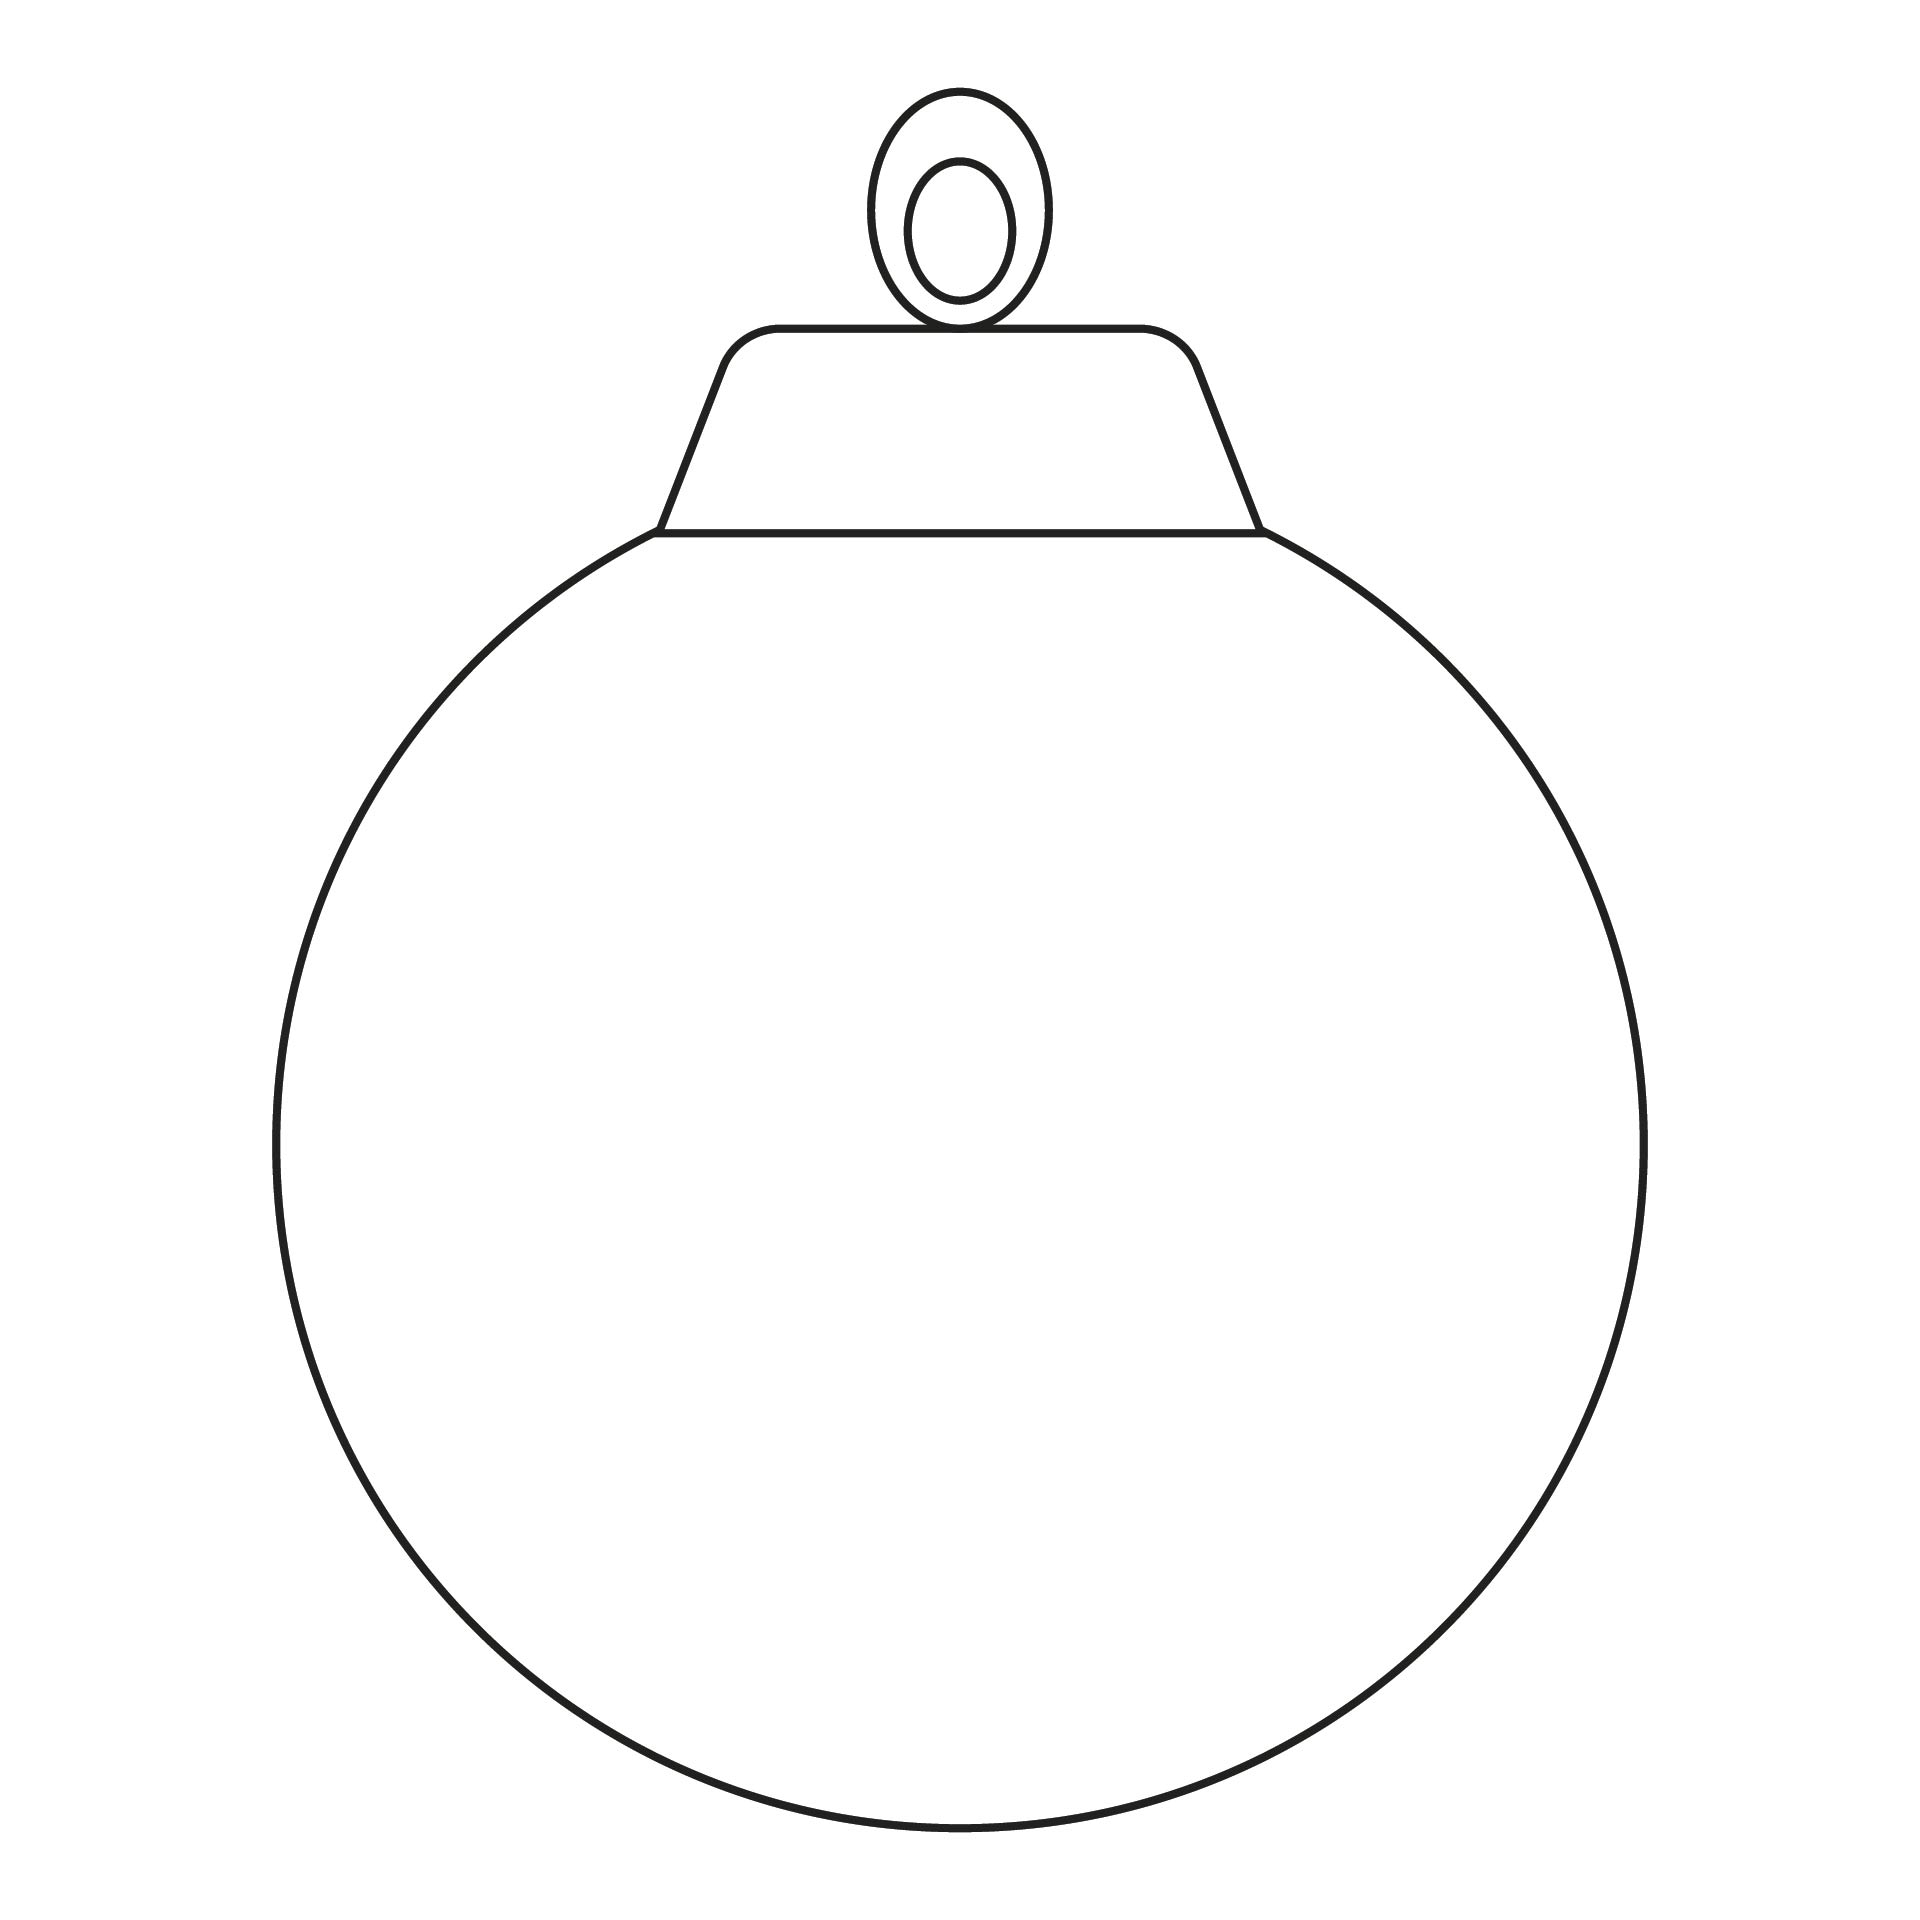 8 Best Images of Ornament Printable Template Christmas Ball Ornament